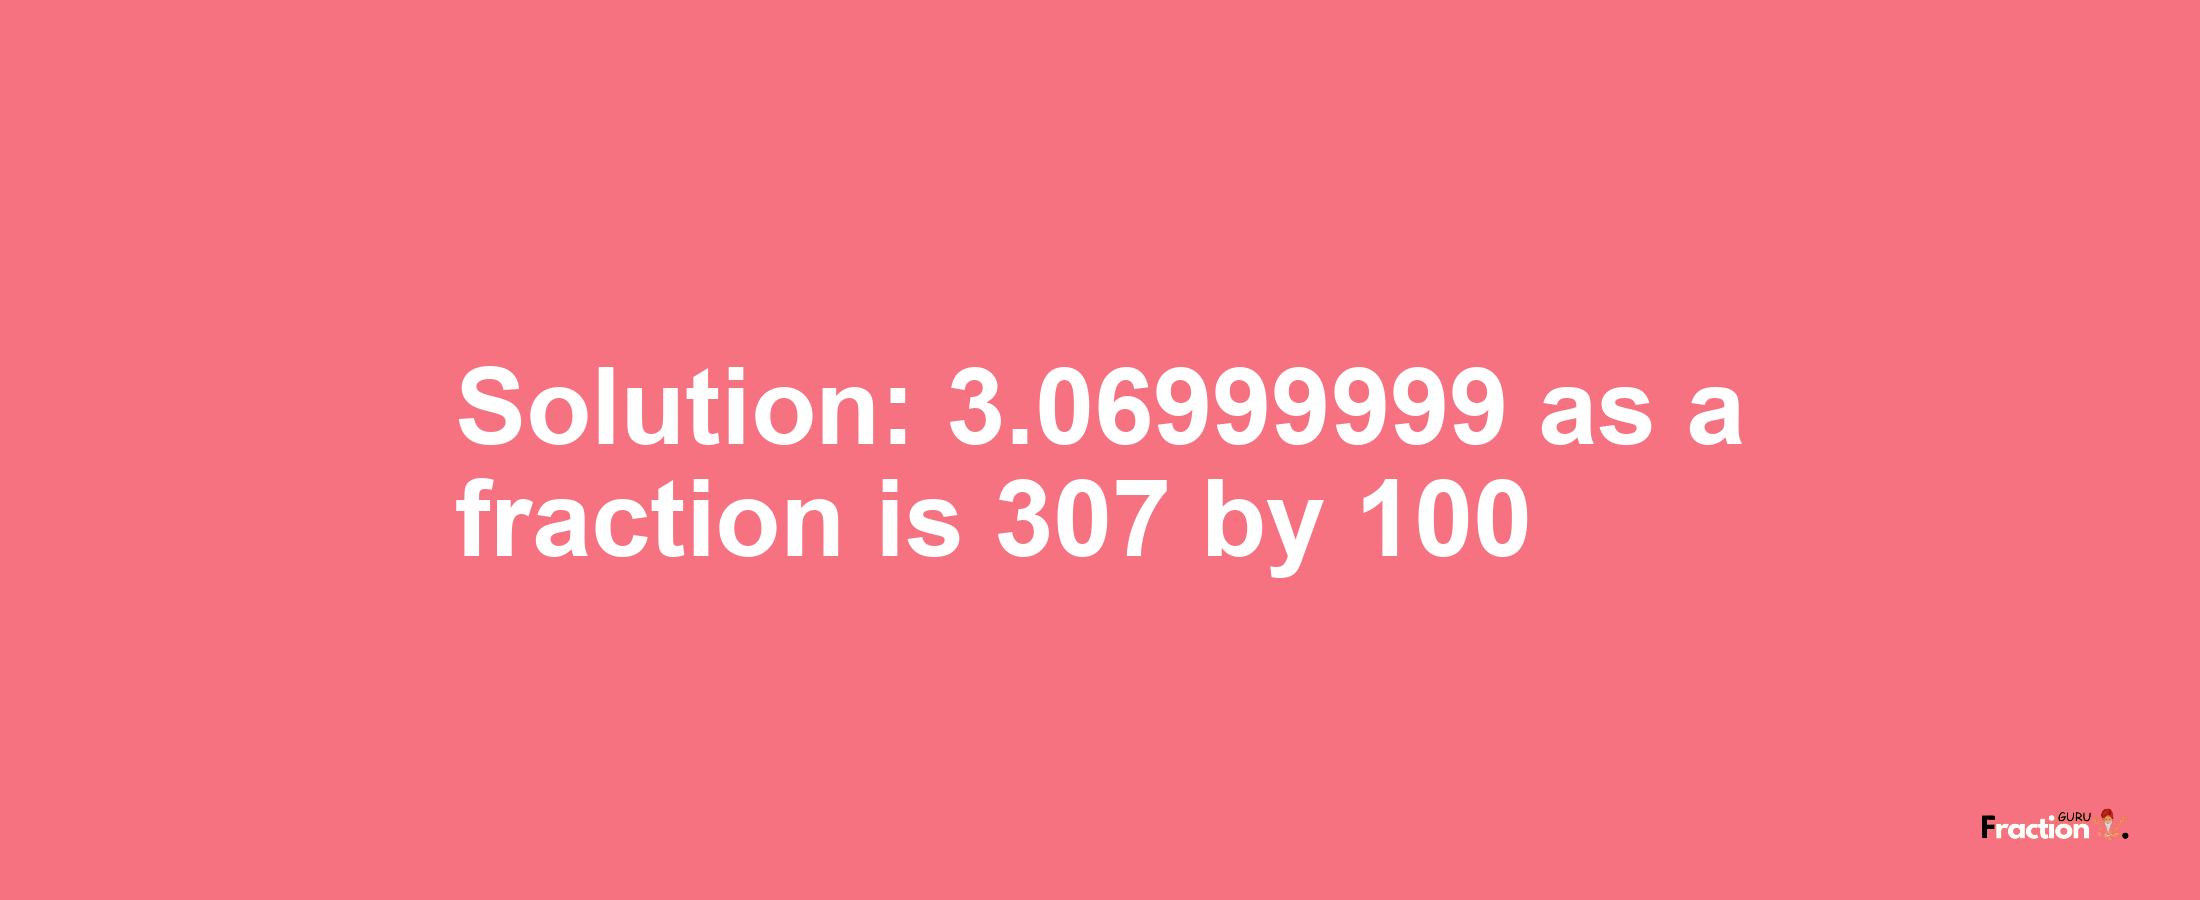 Solution:3.06999999 as a fraction is 307/100